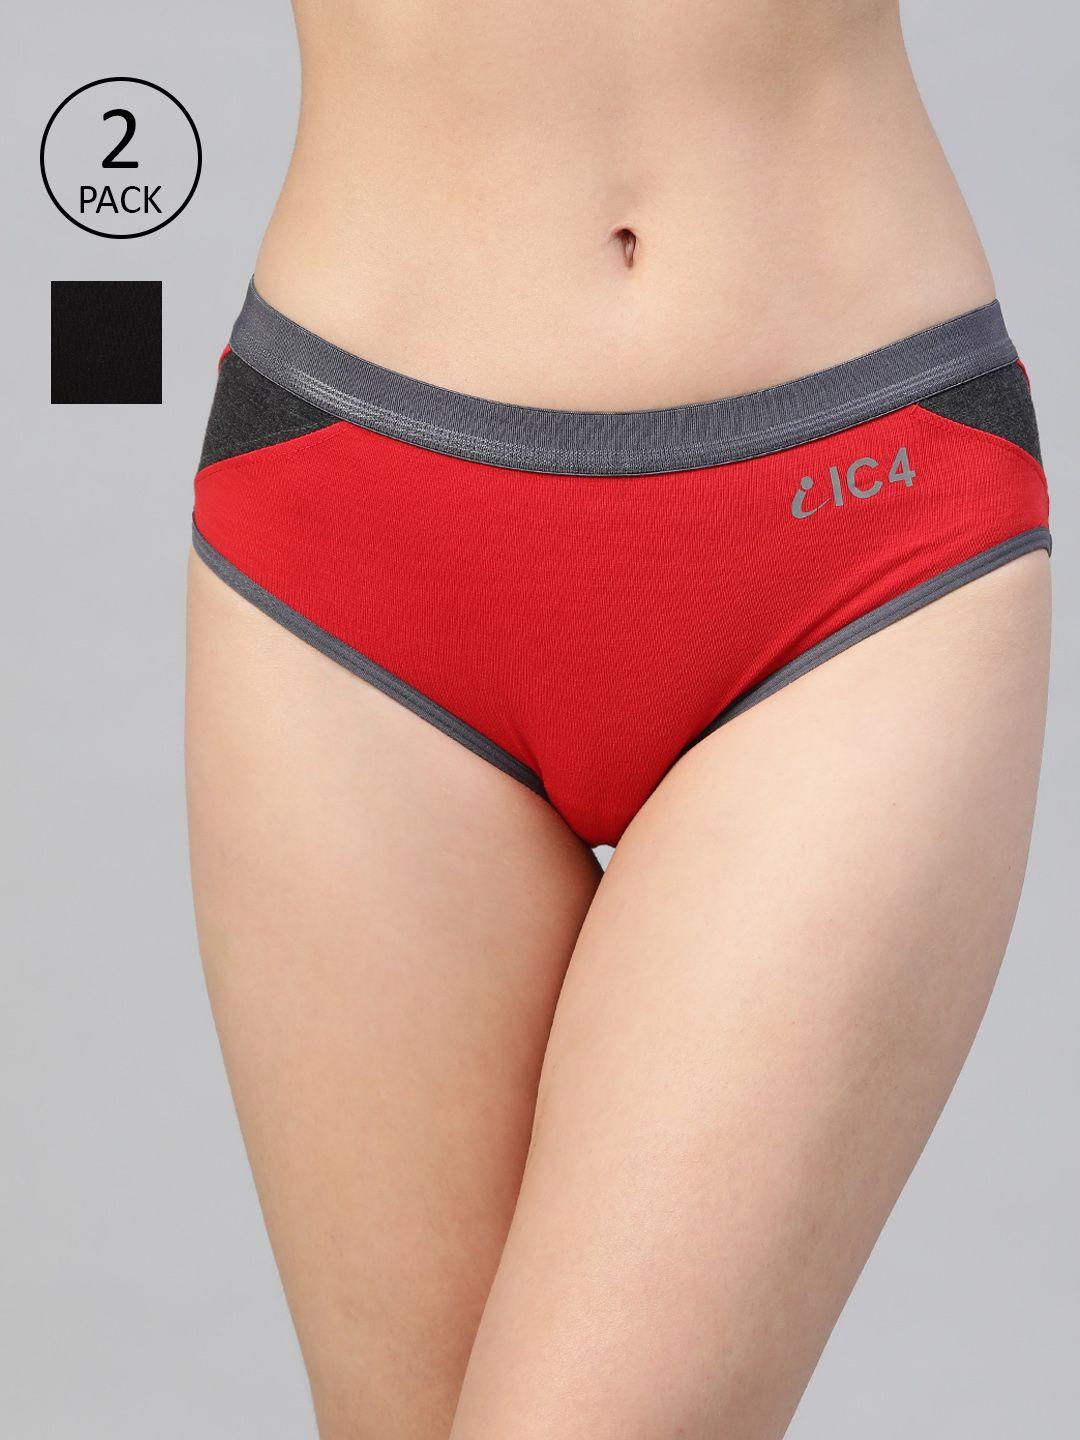 ic4 women pack of 2 solid hipster briefs 0b-r-1006p2